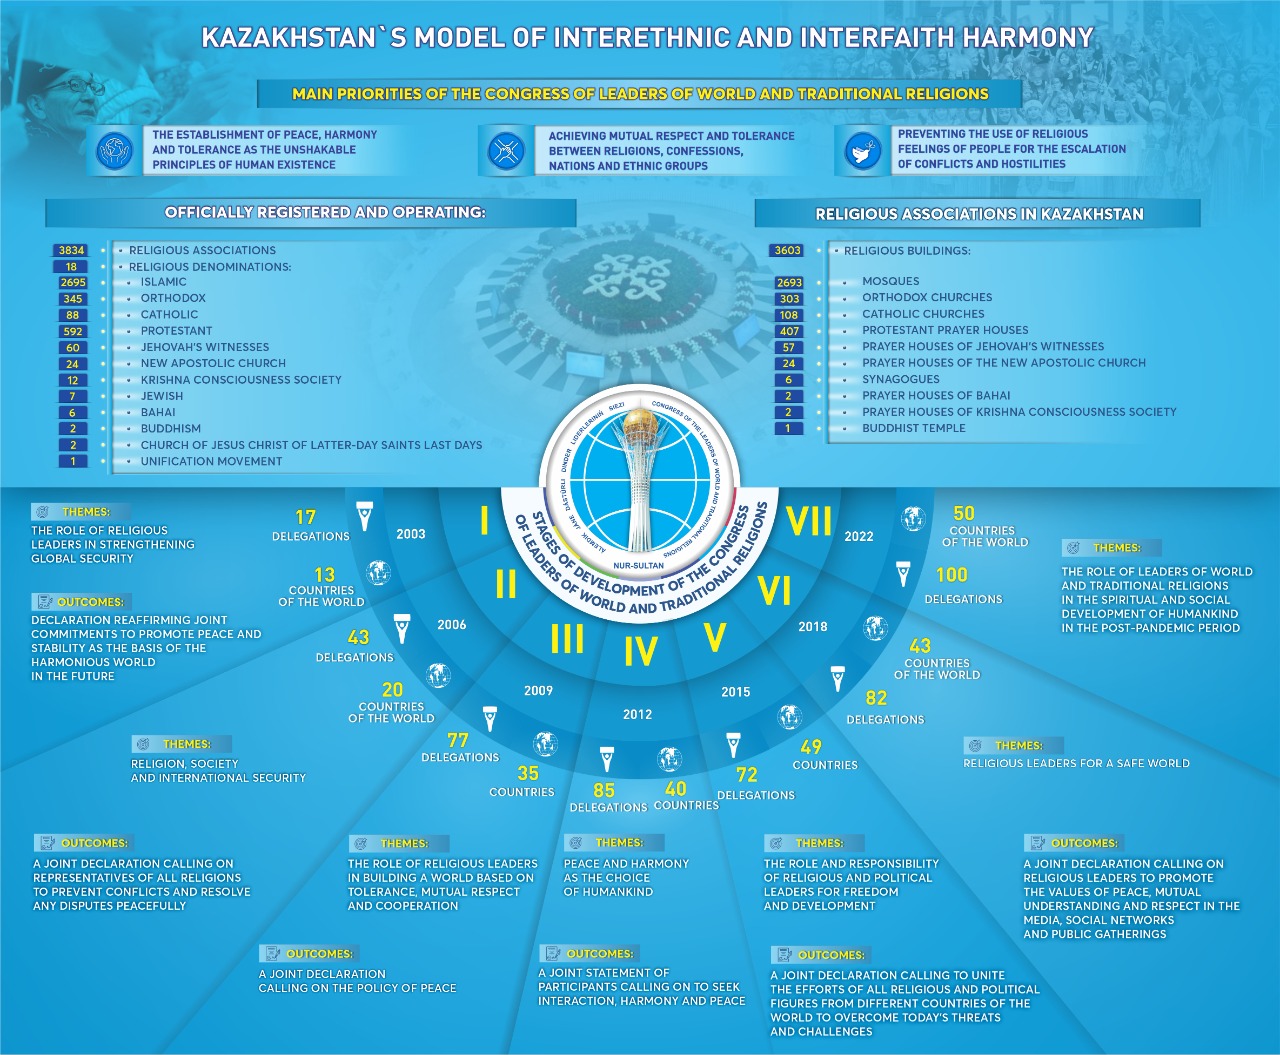 The VII Congress of Leaders of World and Traditional Religions to be held in Kazakhstan